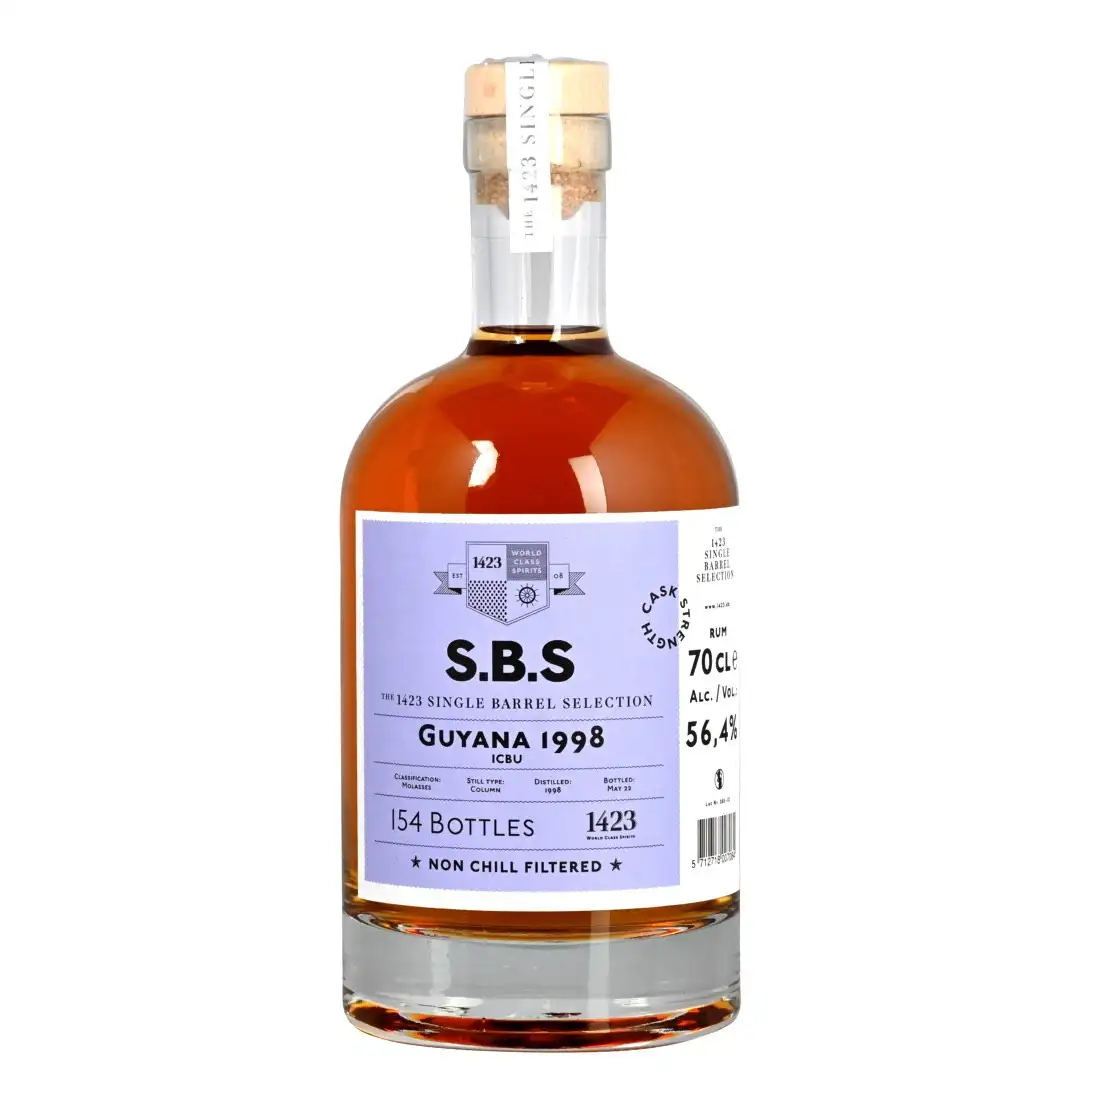 Image of the front of the bottle of the rum S.B.S Guyana ICBU